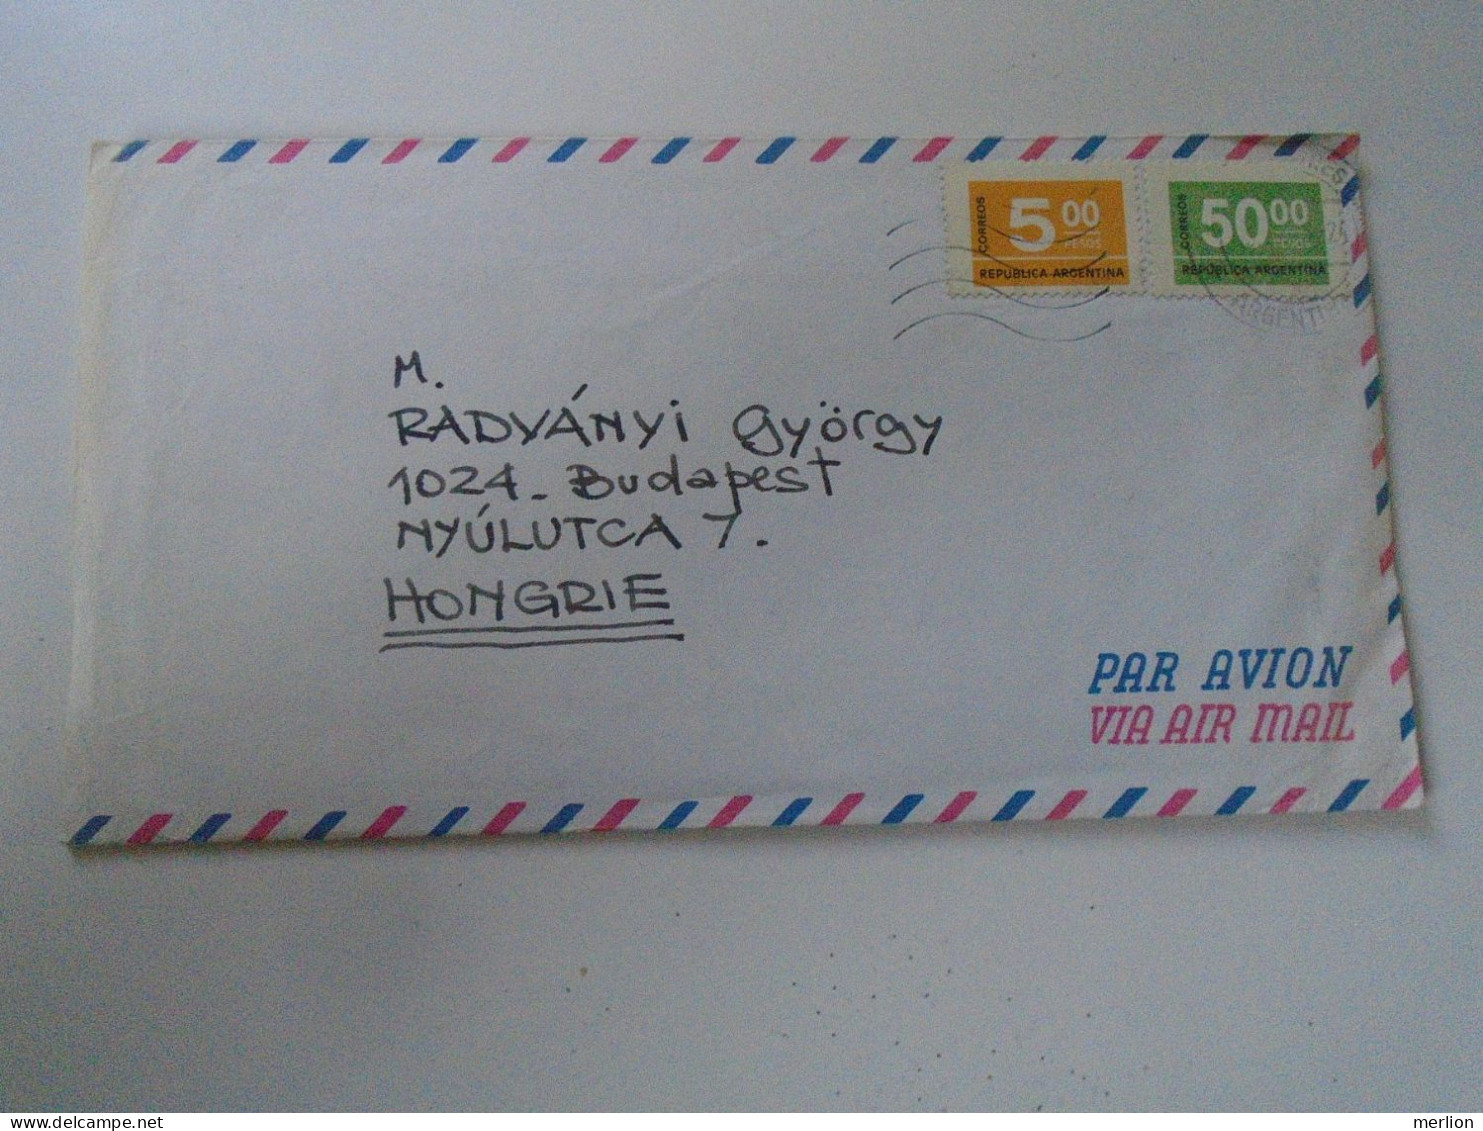 ZA454.46 ARGENTINA  -Airmail Cover  - 1976   Sent To Hungary  - Stamps Radványi - Briefe U. Dokumente